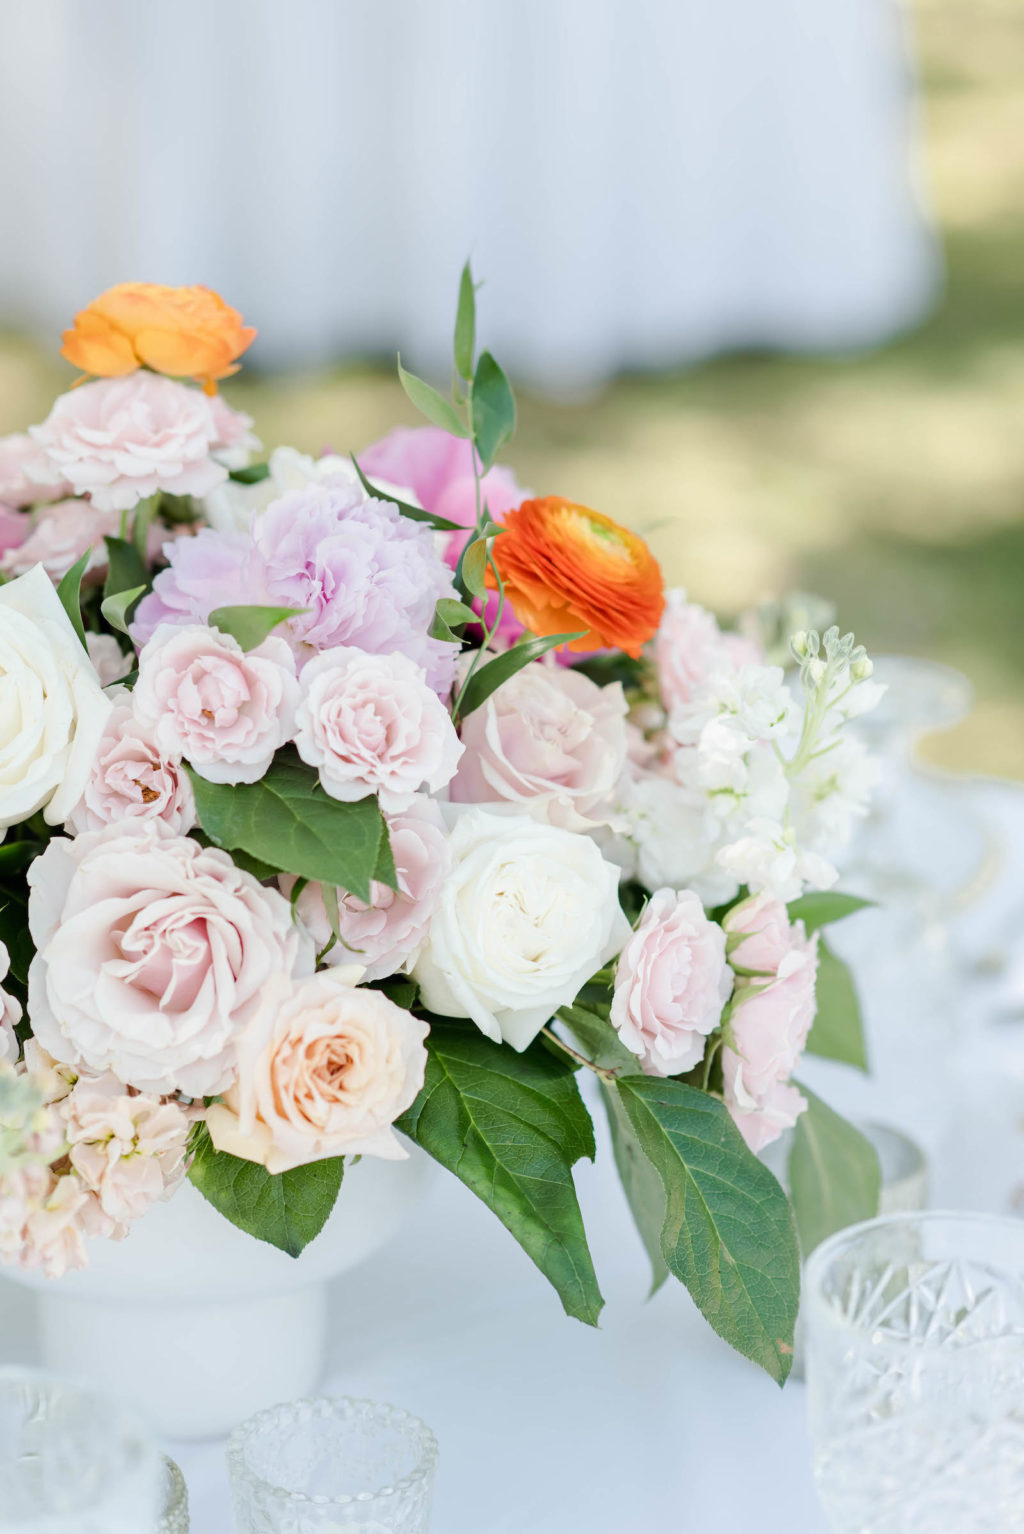 Pastel White and Blush Pink Rose Centerpiece with Greenery and Clear Glass Beaded Wedding Chargers | Romantic Garden Wedding Reception Ideas | Tampa Bay Rental Company Outside the Box Event Rentals